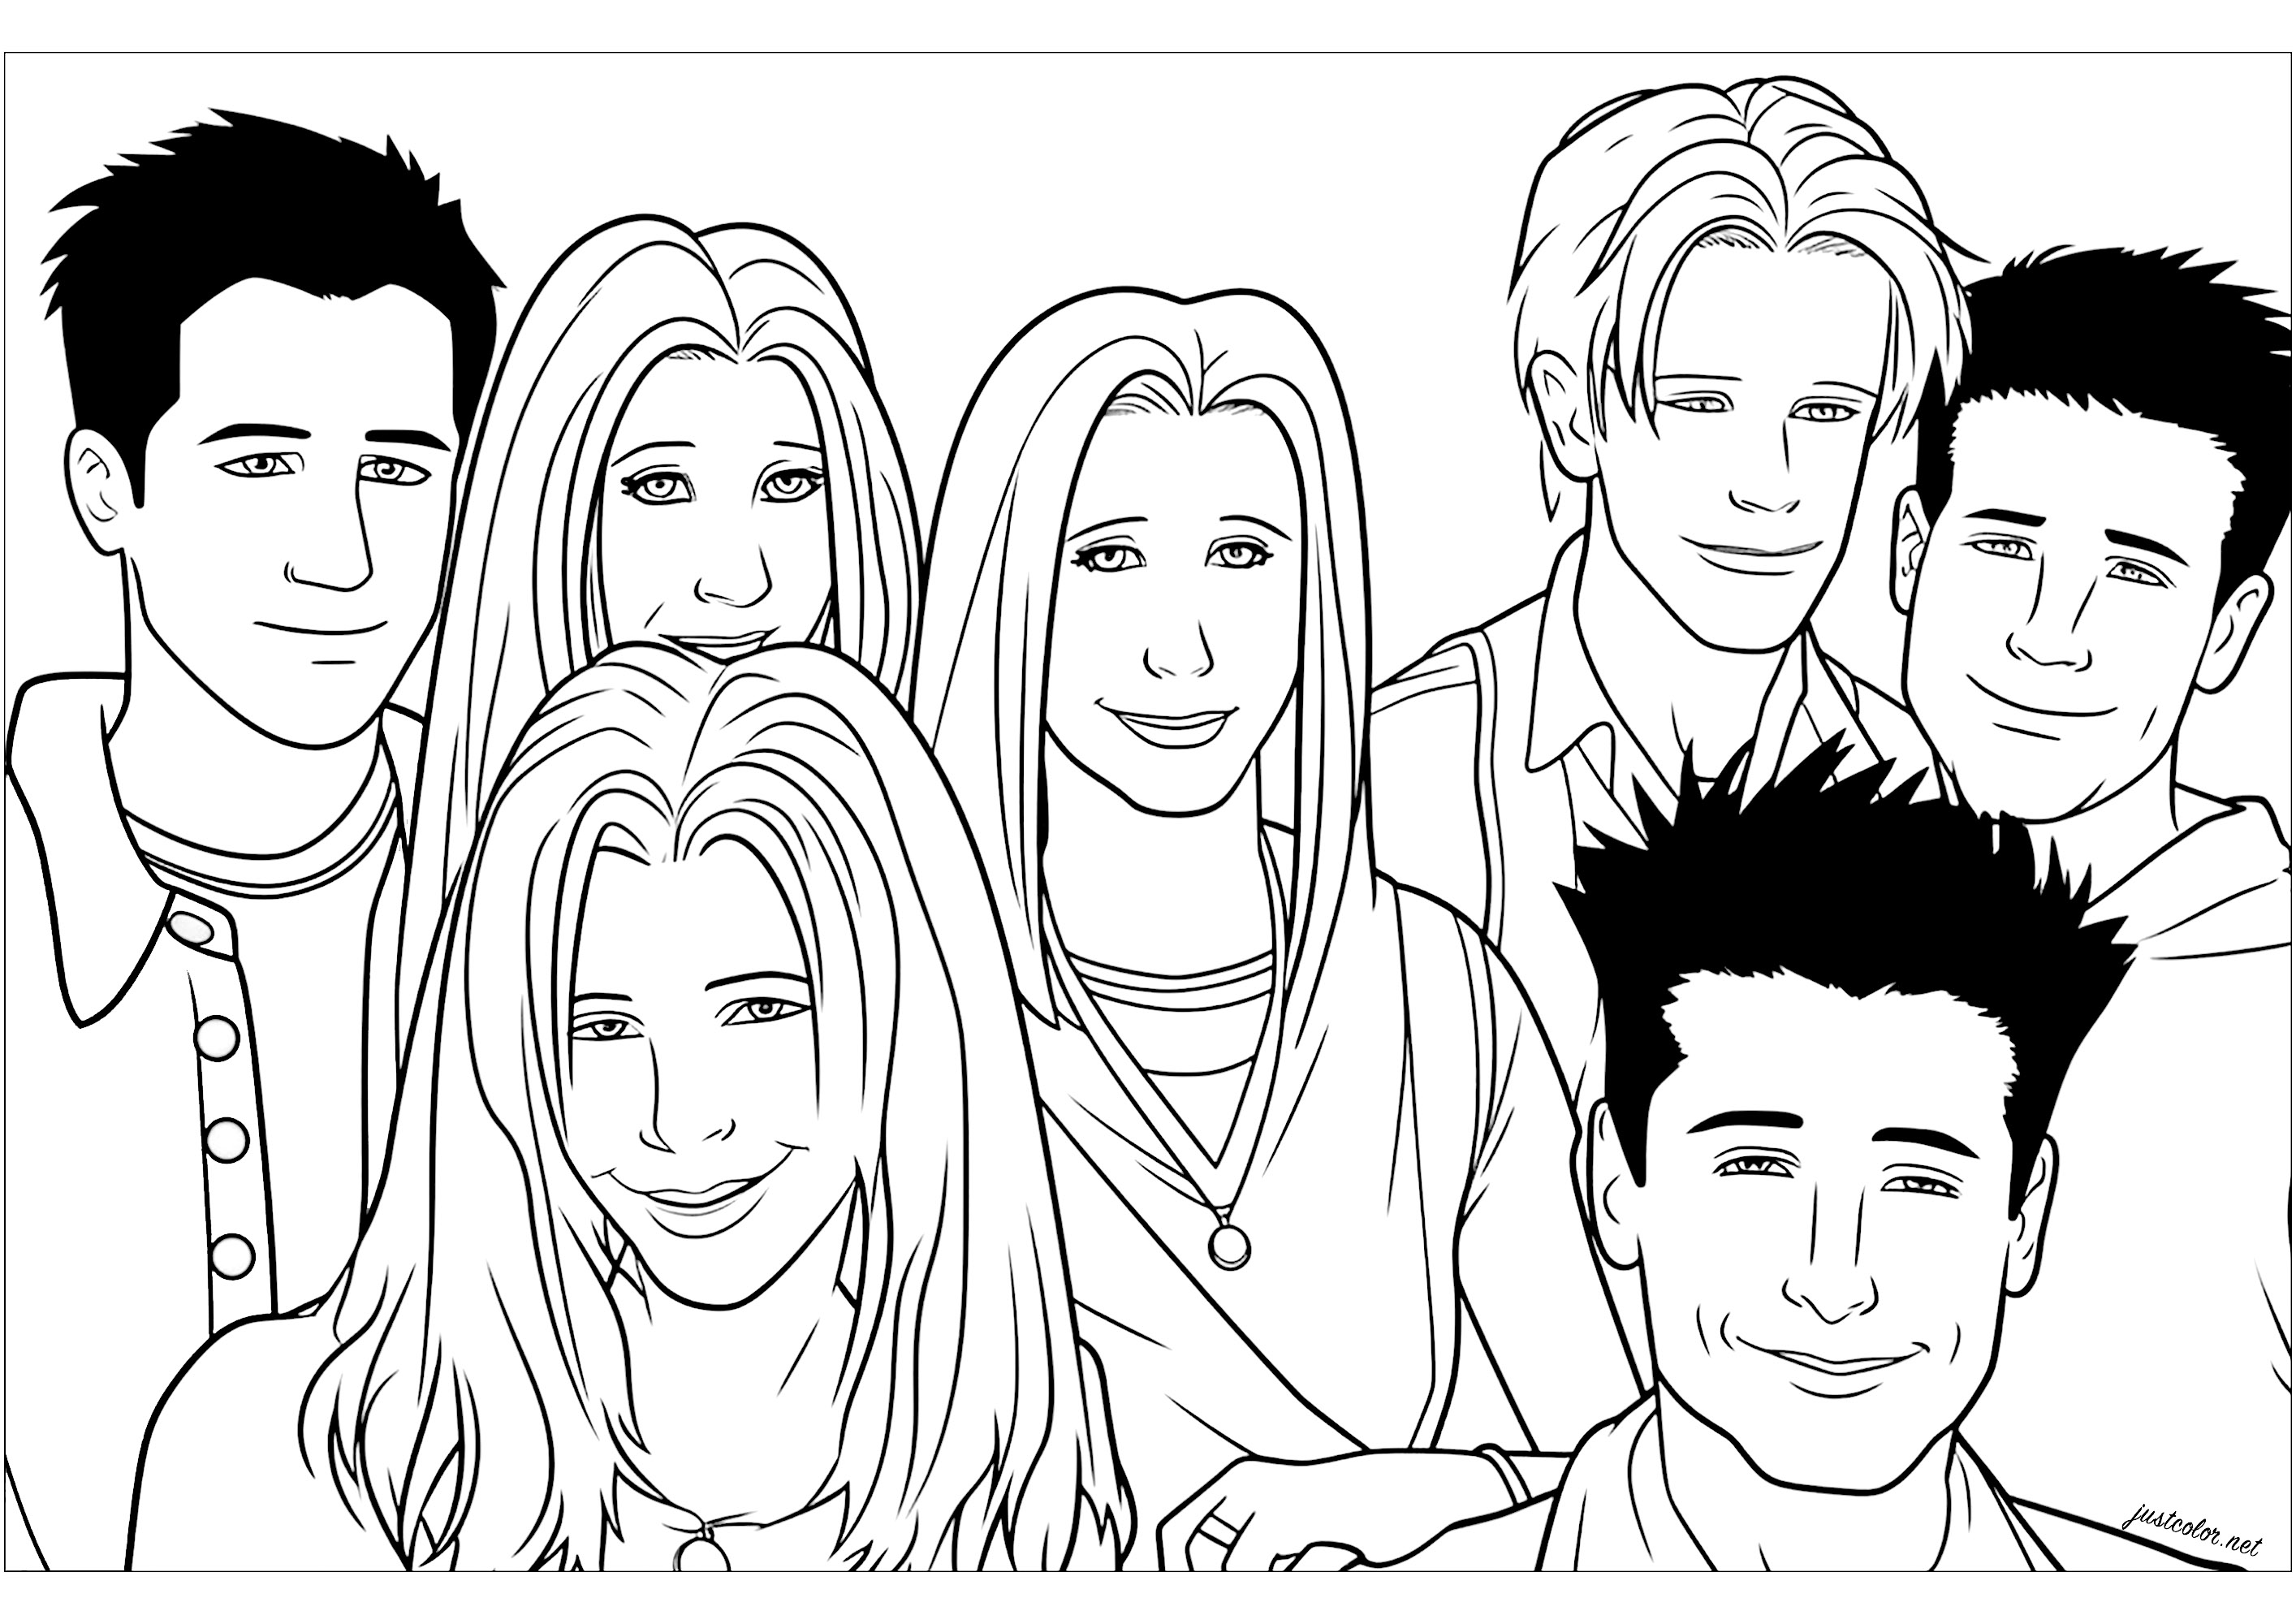 4 guys and 3 girls ...... like something out of a 90s cult series!. Perfect for those nostalgic for the 90s, for Brenda, Dylan, Brandon ... Or Monica, Rachel, Chandler, Ross ...